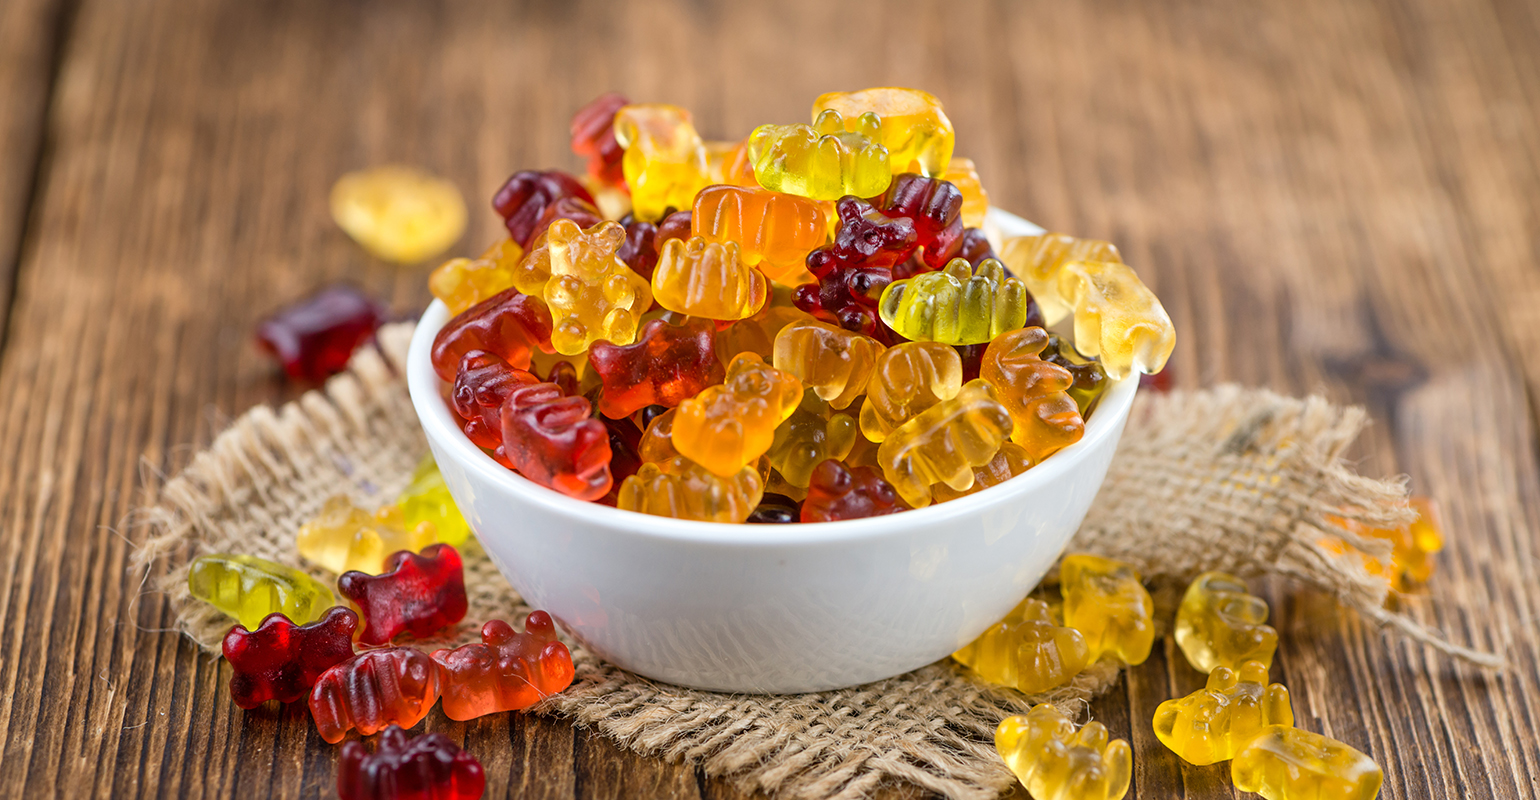 Discover the Top Picks: The Best Delta 8 Gummies for Your Wellness Journey